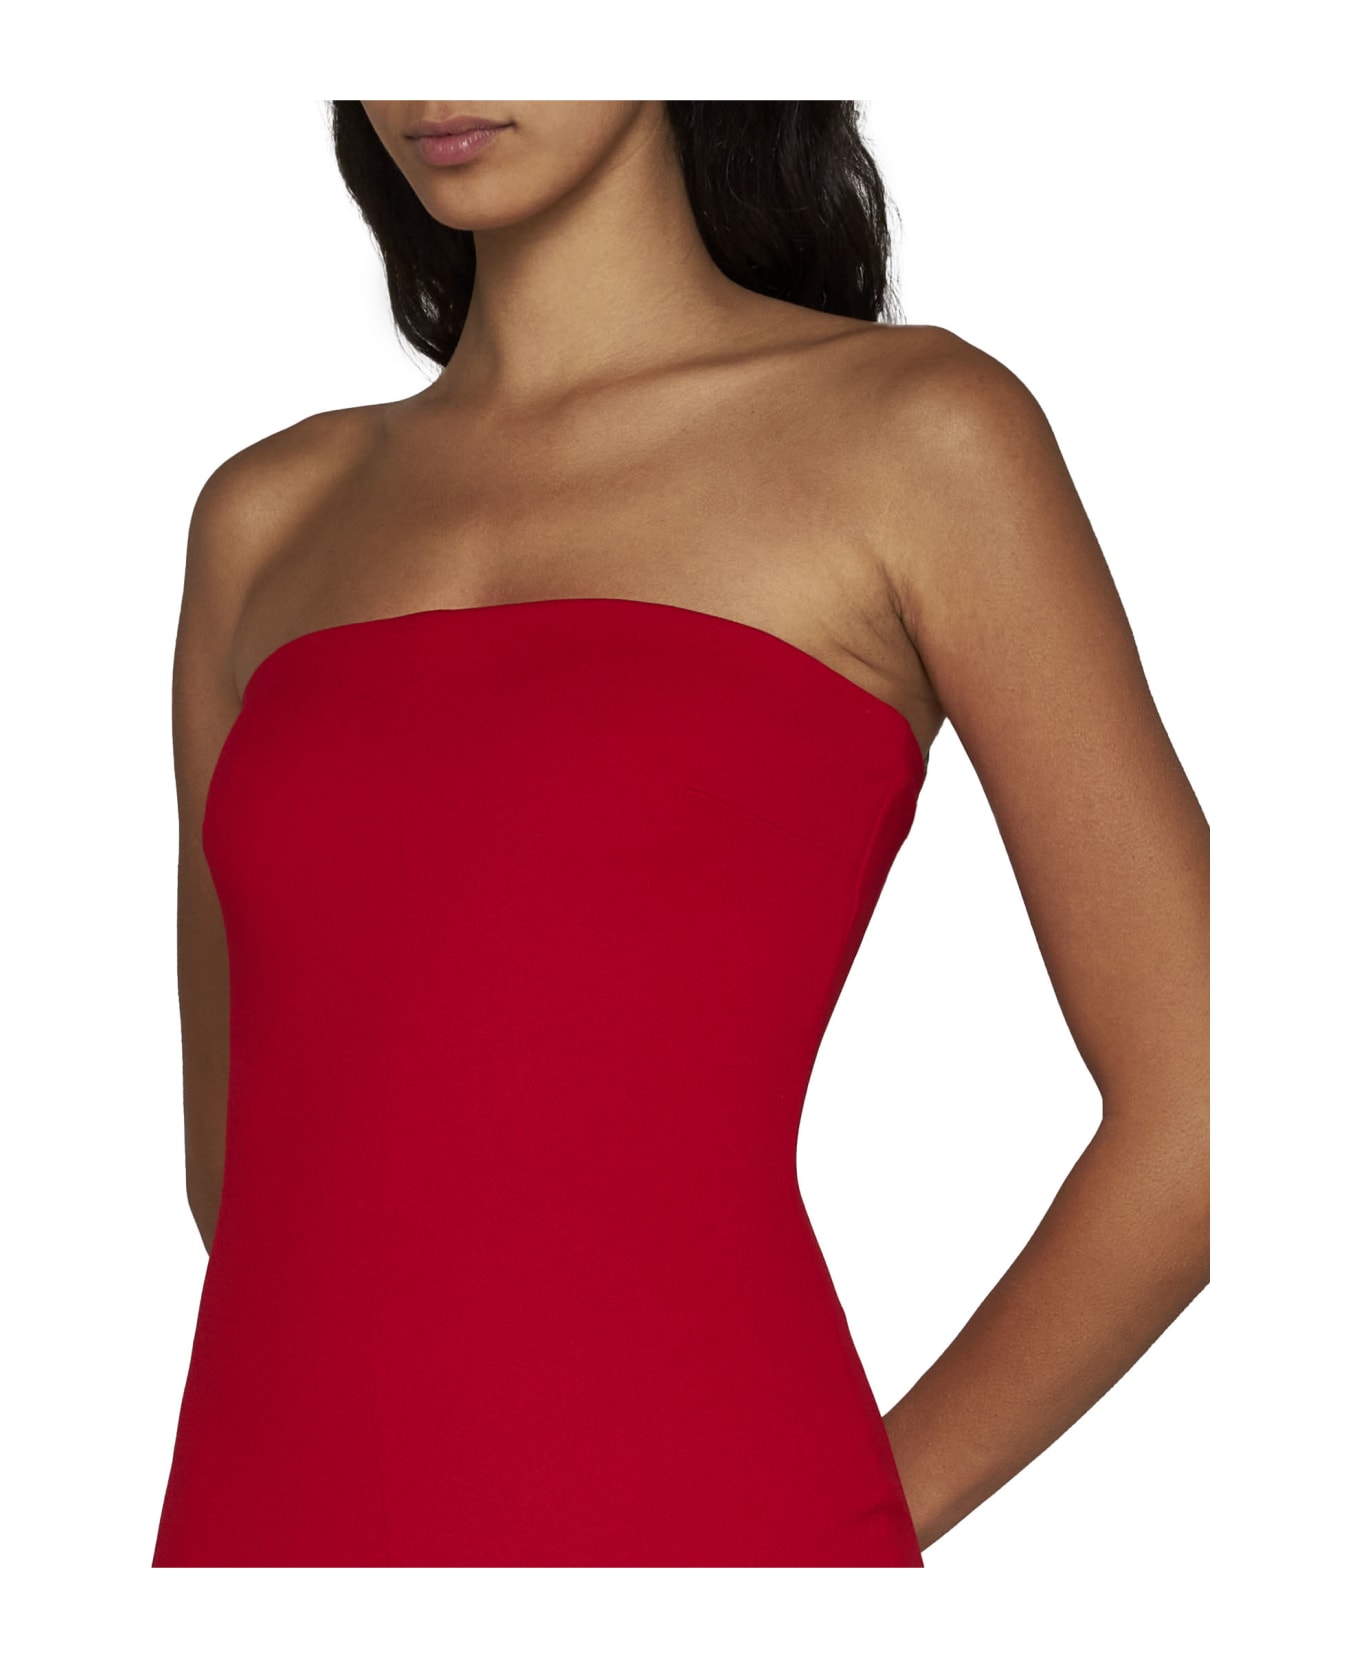 Solace London Dress - Red